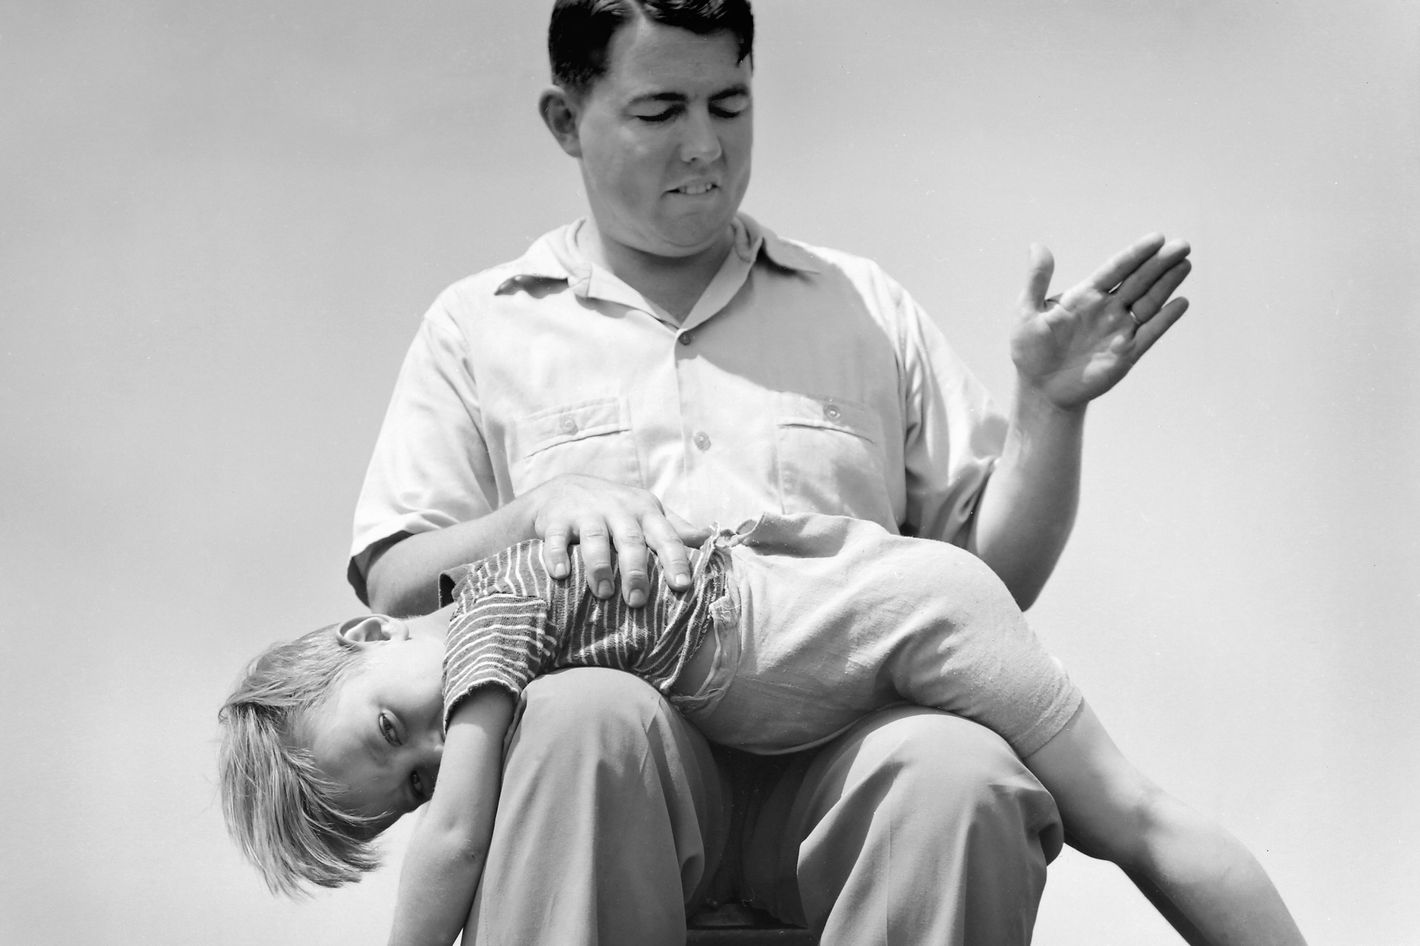 Does Spanking Increase a Childs Odds of Committing Abuse?